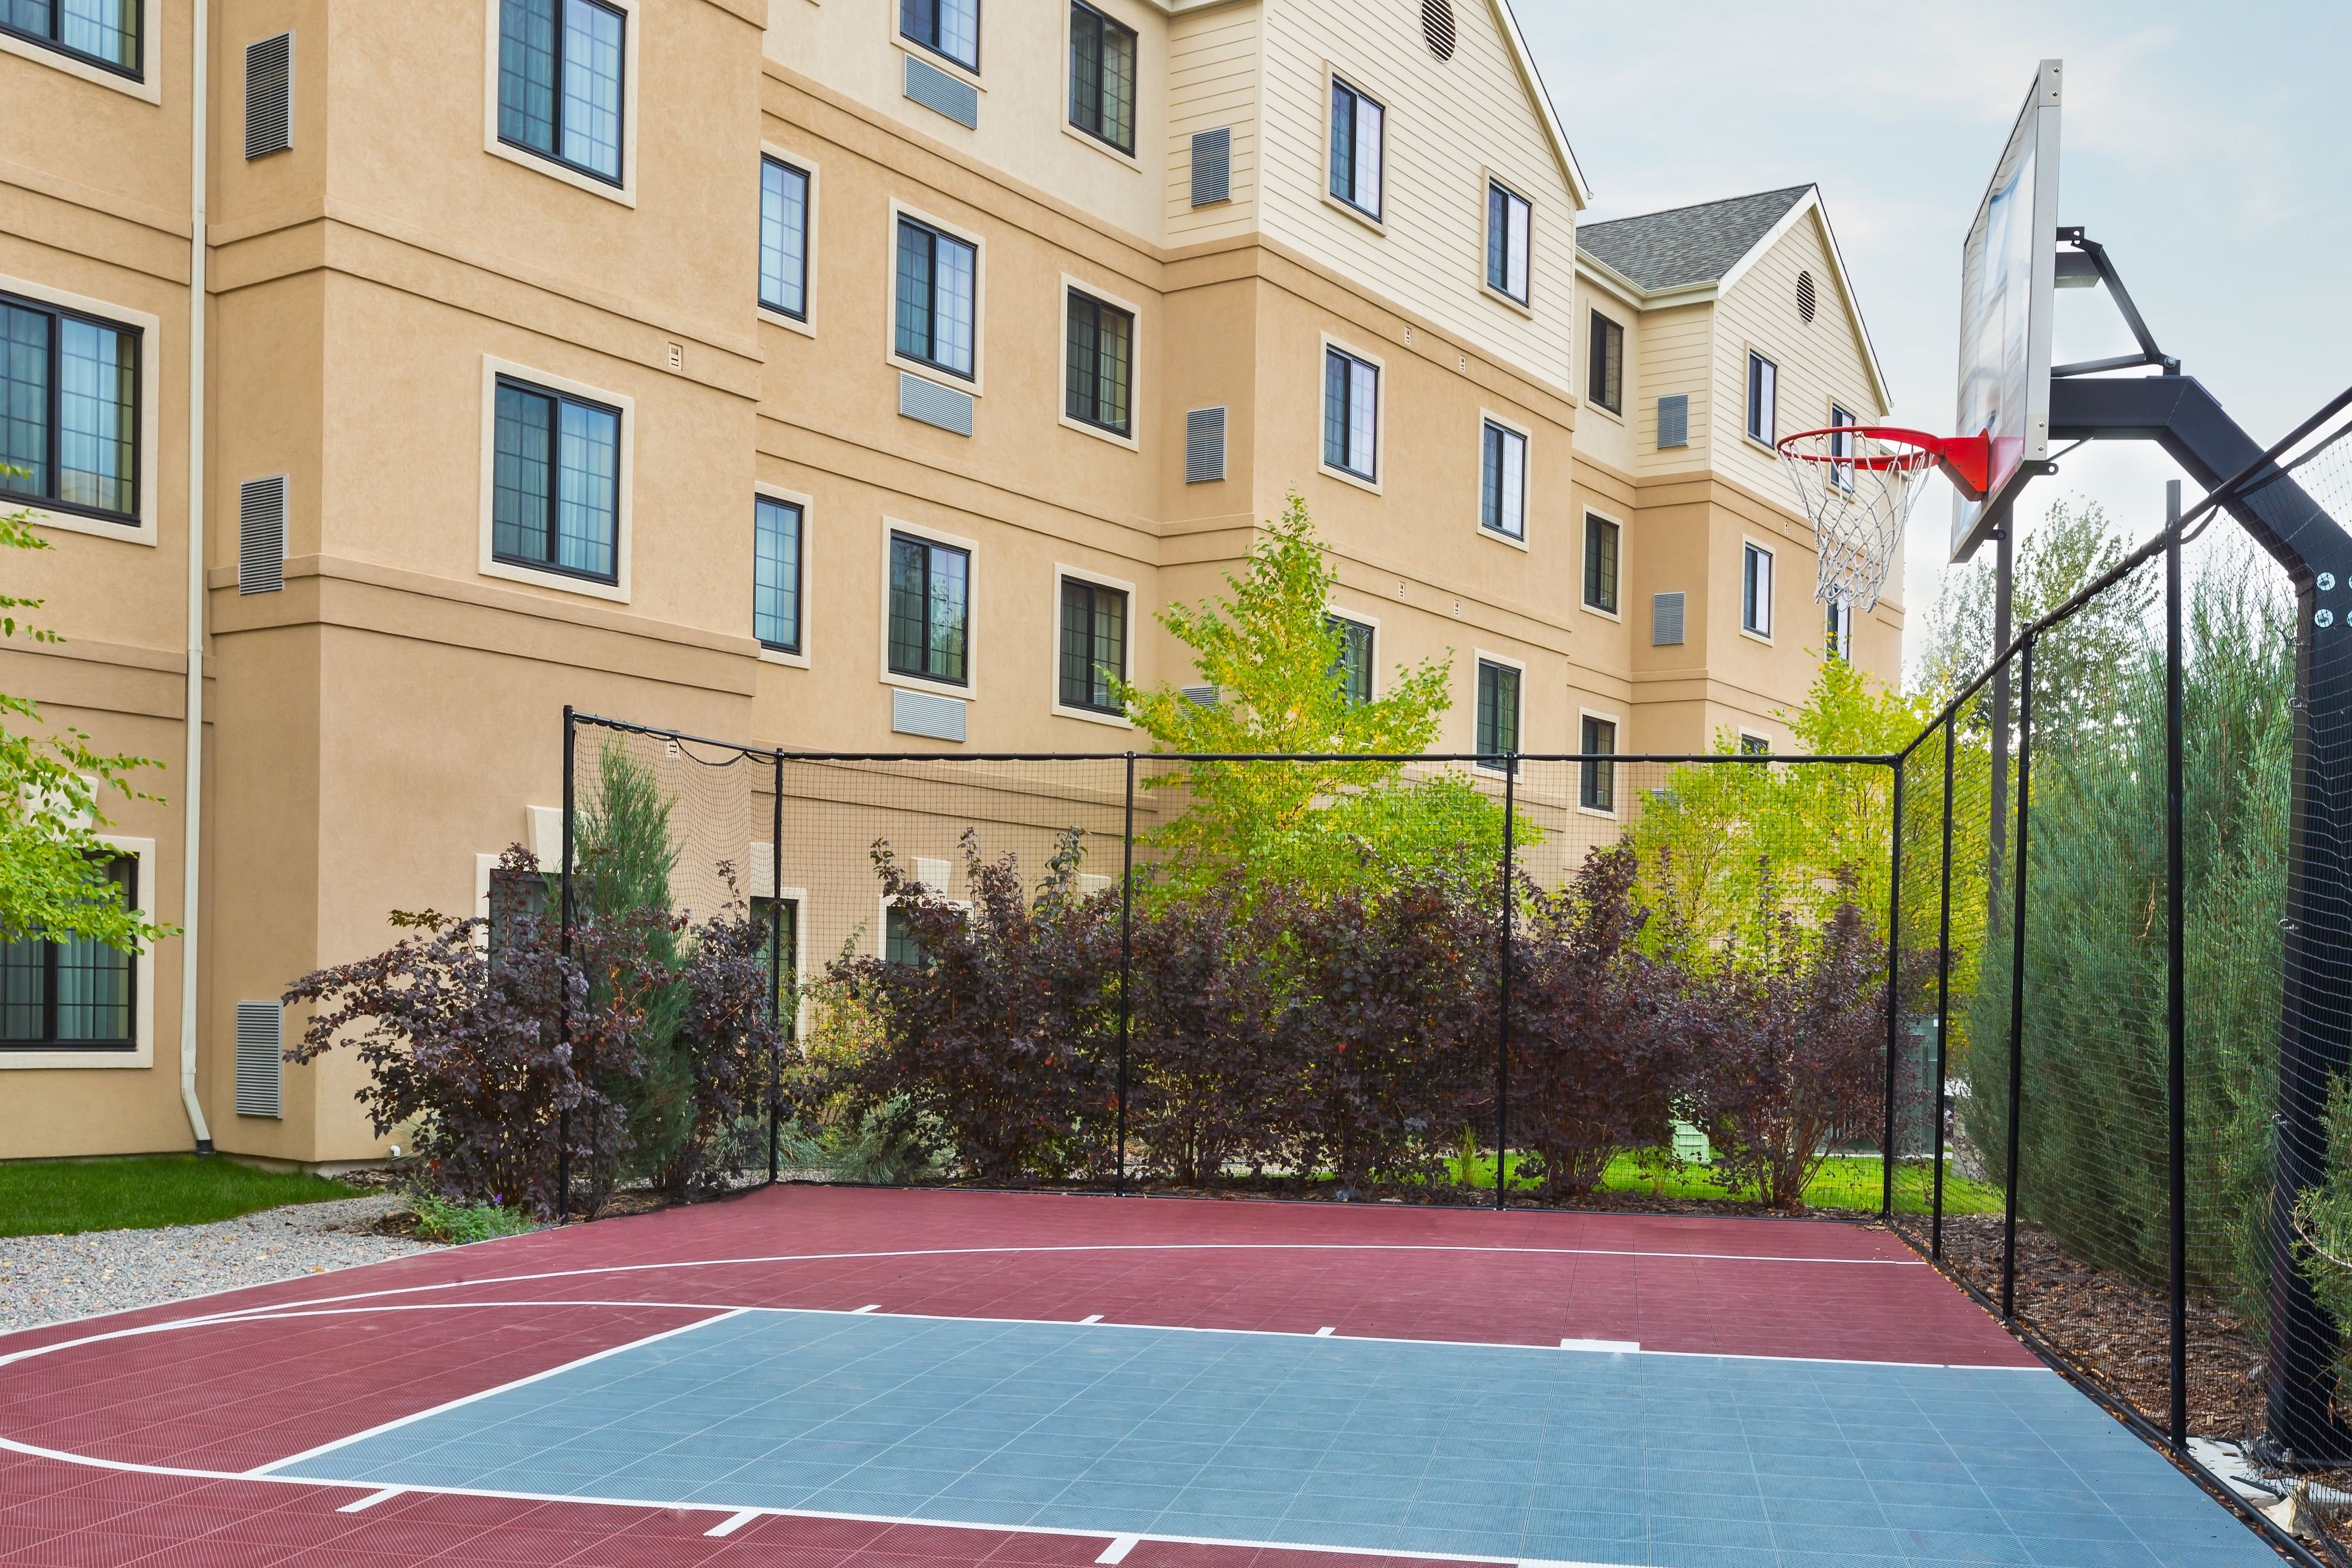 Enjoy a pick-up game at our outdoor basketball court